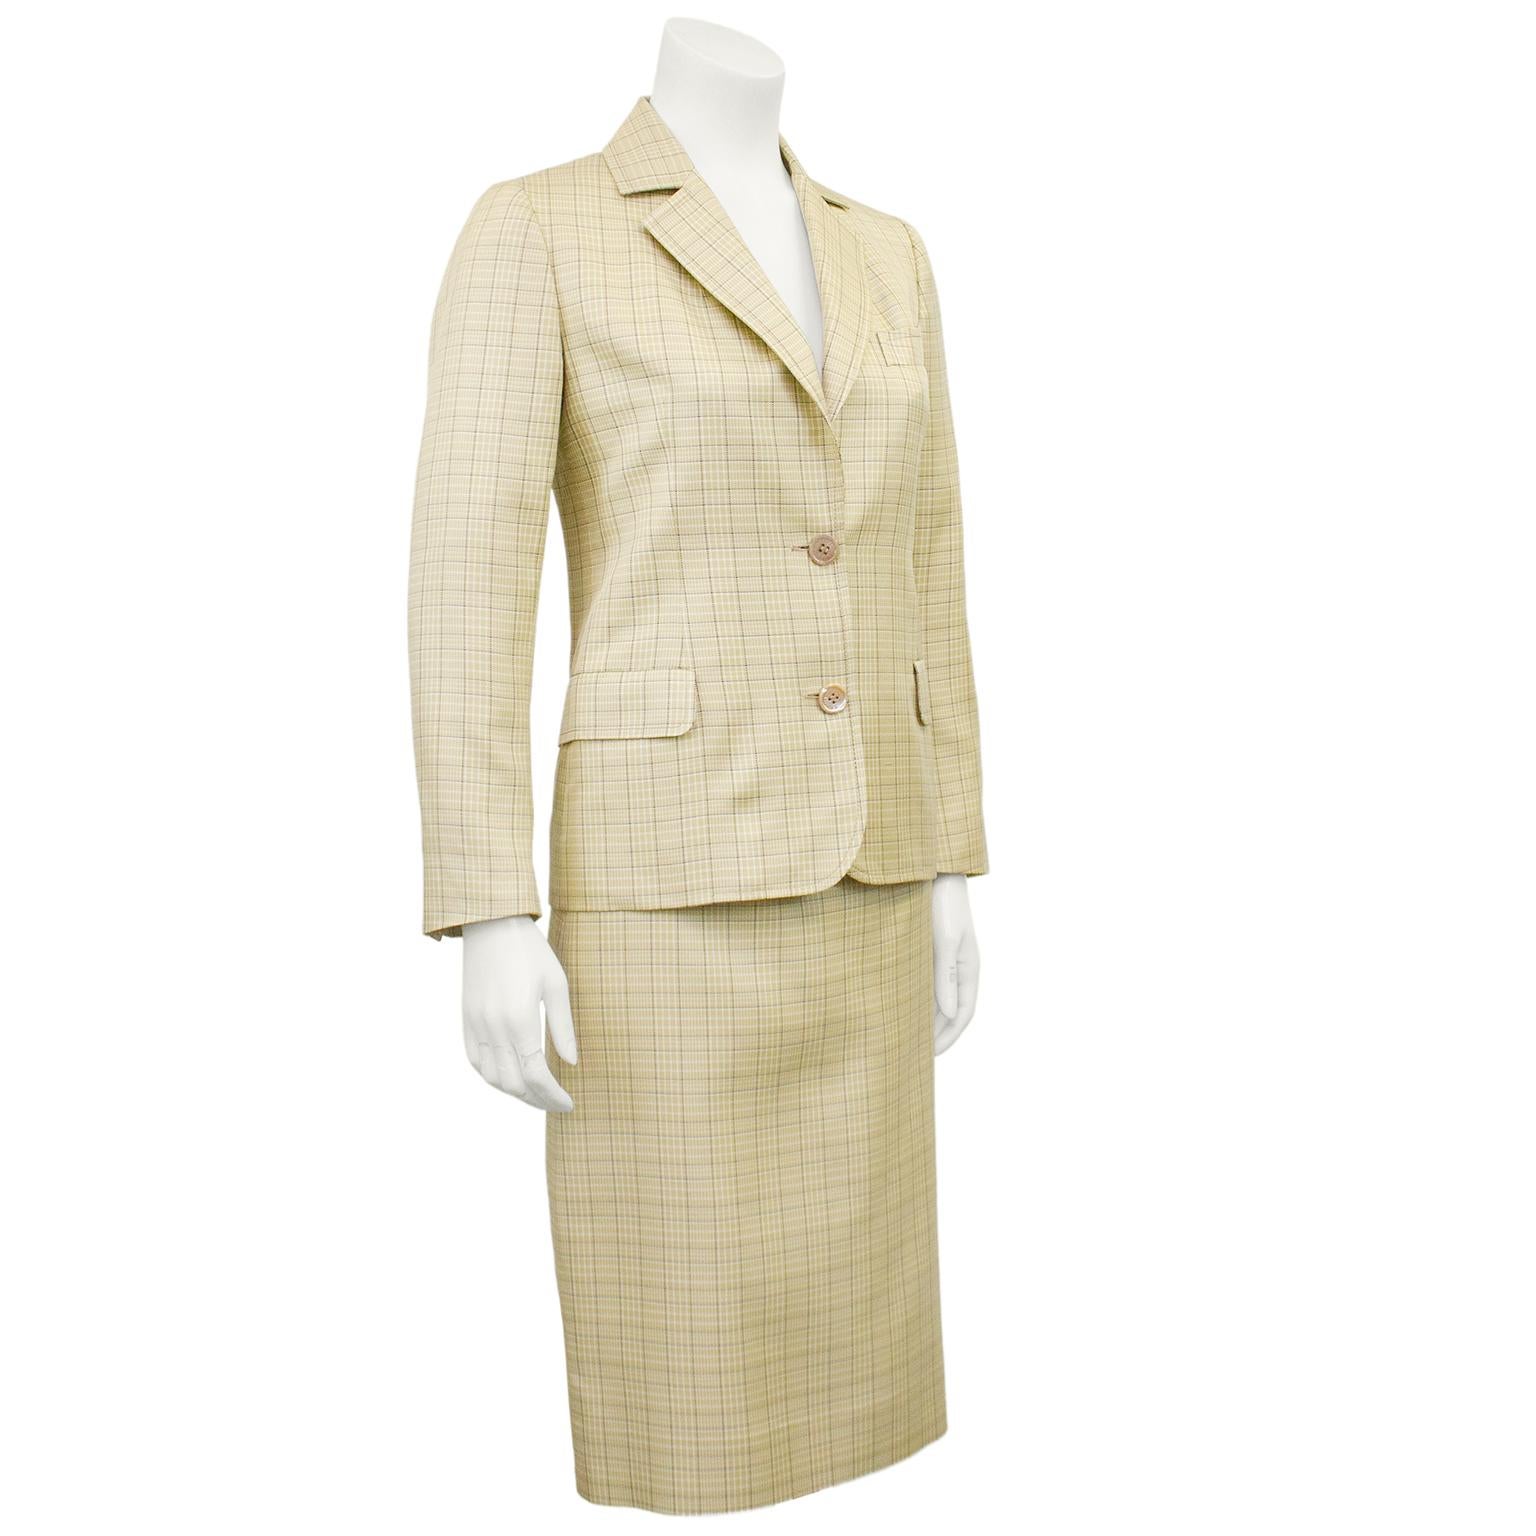 1970s Celine silk skirt suit. Beige, white and black all over glen check. Jacket is a classic blazer with a notched collar, single horizontal slit pocket at bust, flap pockets at hips. High waisted pencil skirt with beige leather faux belt detail at